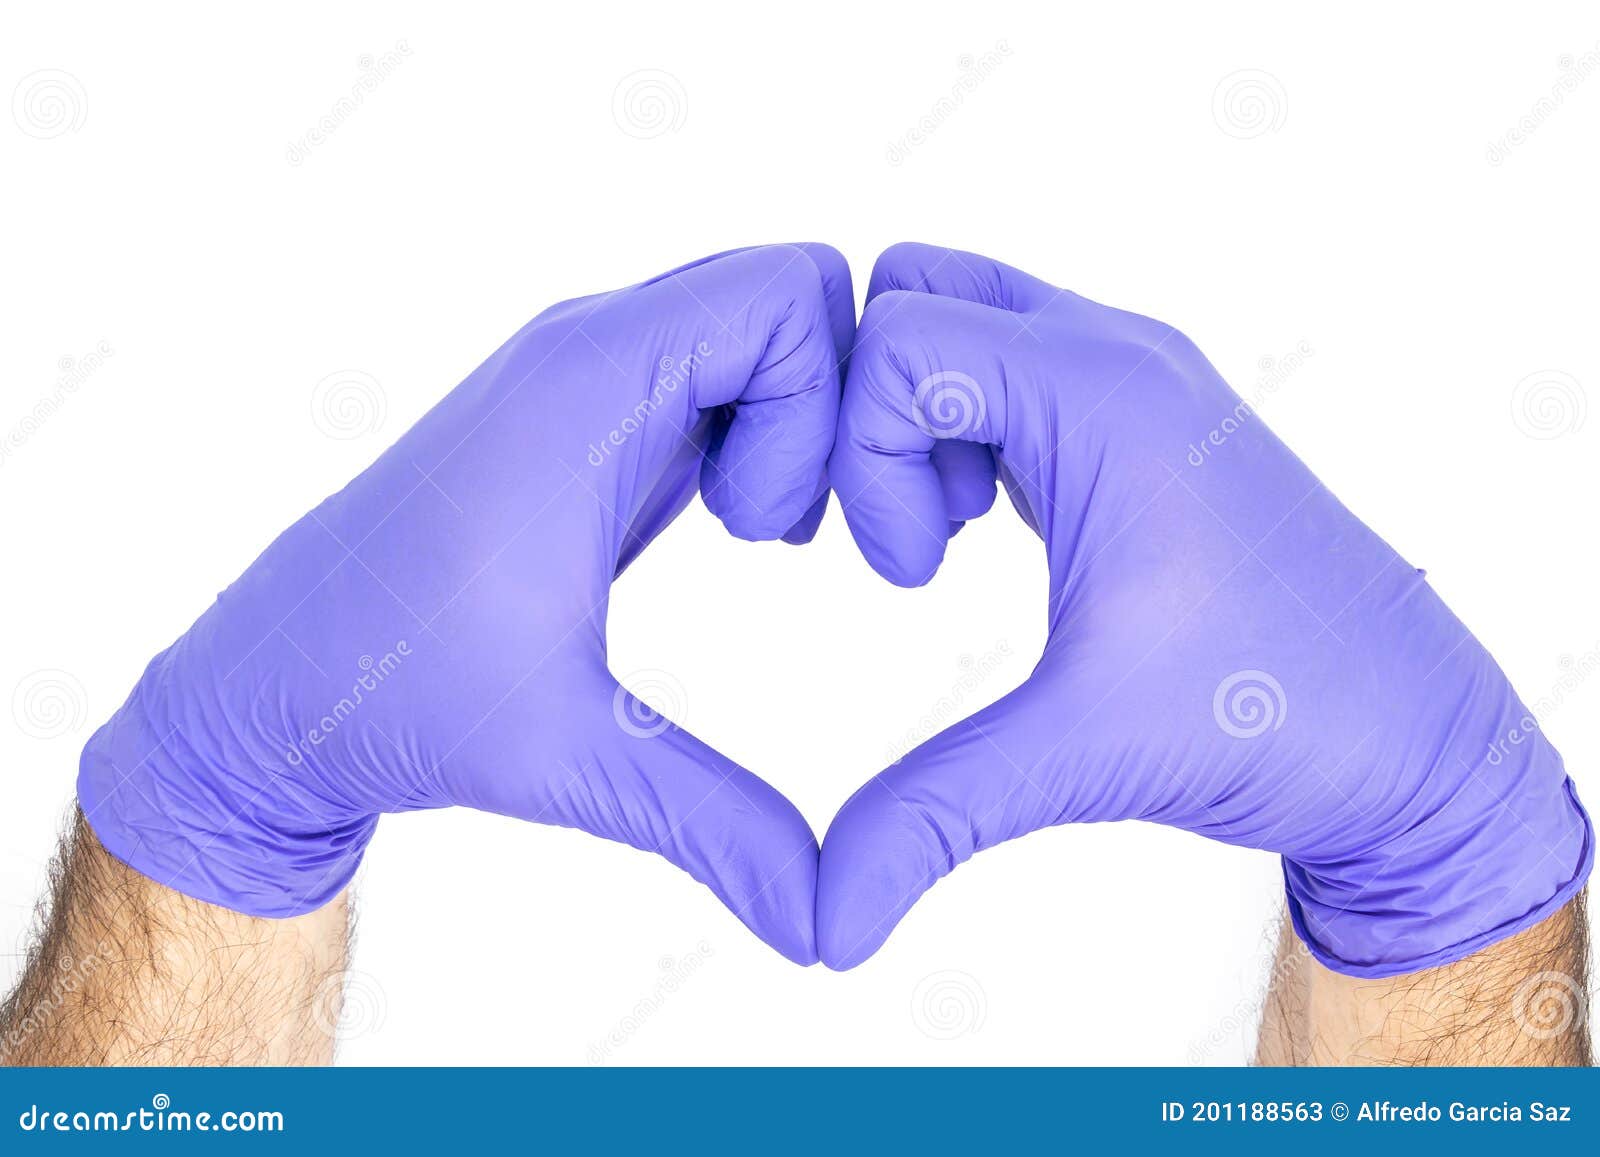 Hands of a Doctor or Nurse with Medical Gloves Depict a Heart Isolated ...